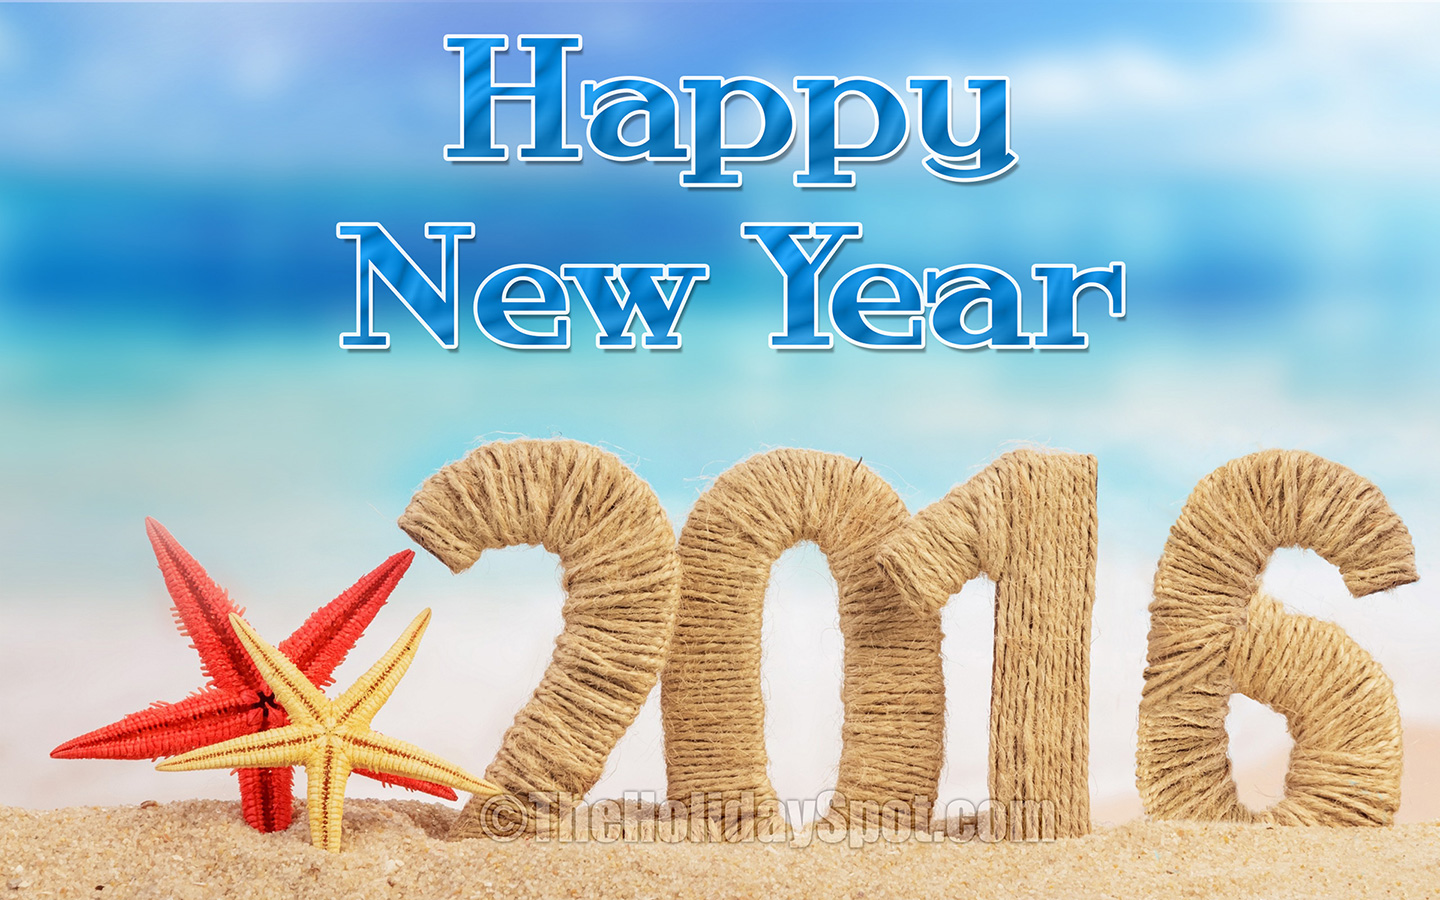 New Year 2016 Wallpapers for Desktop Widescreen Mobile High